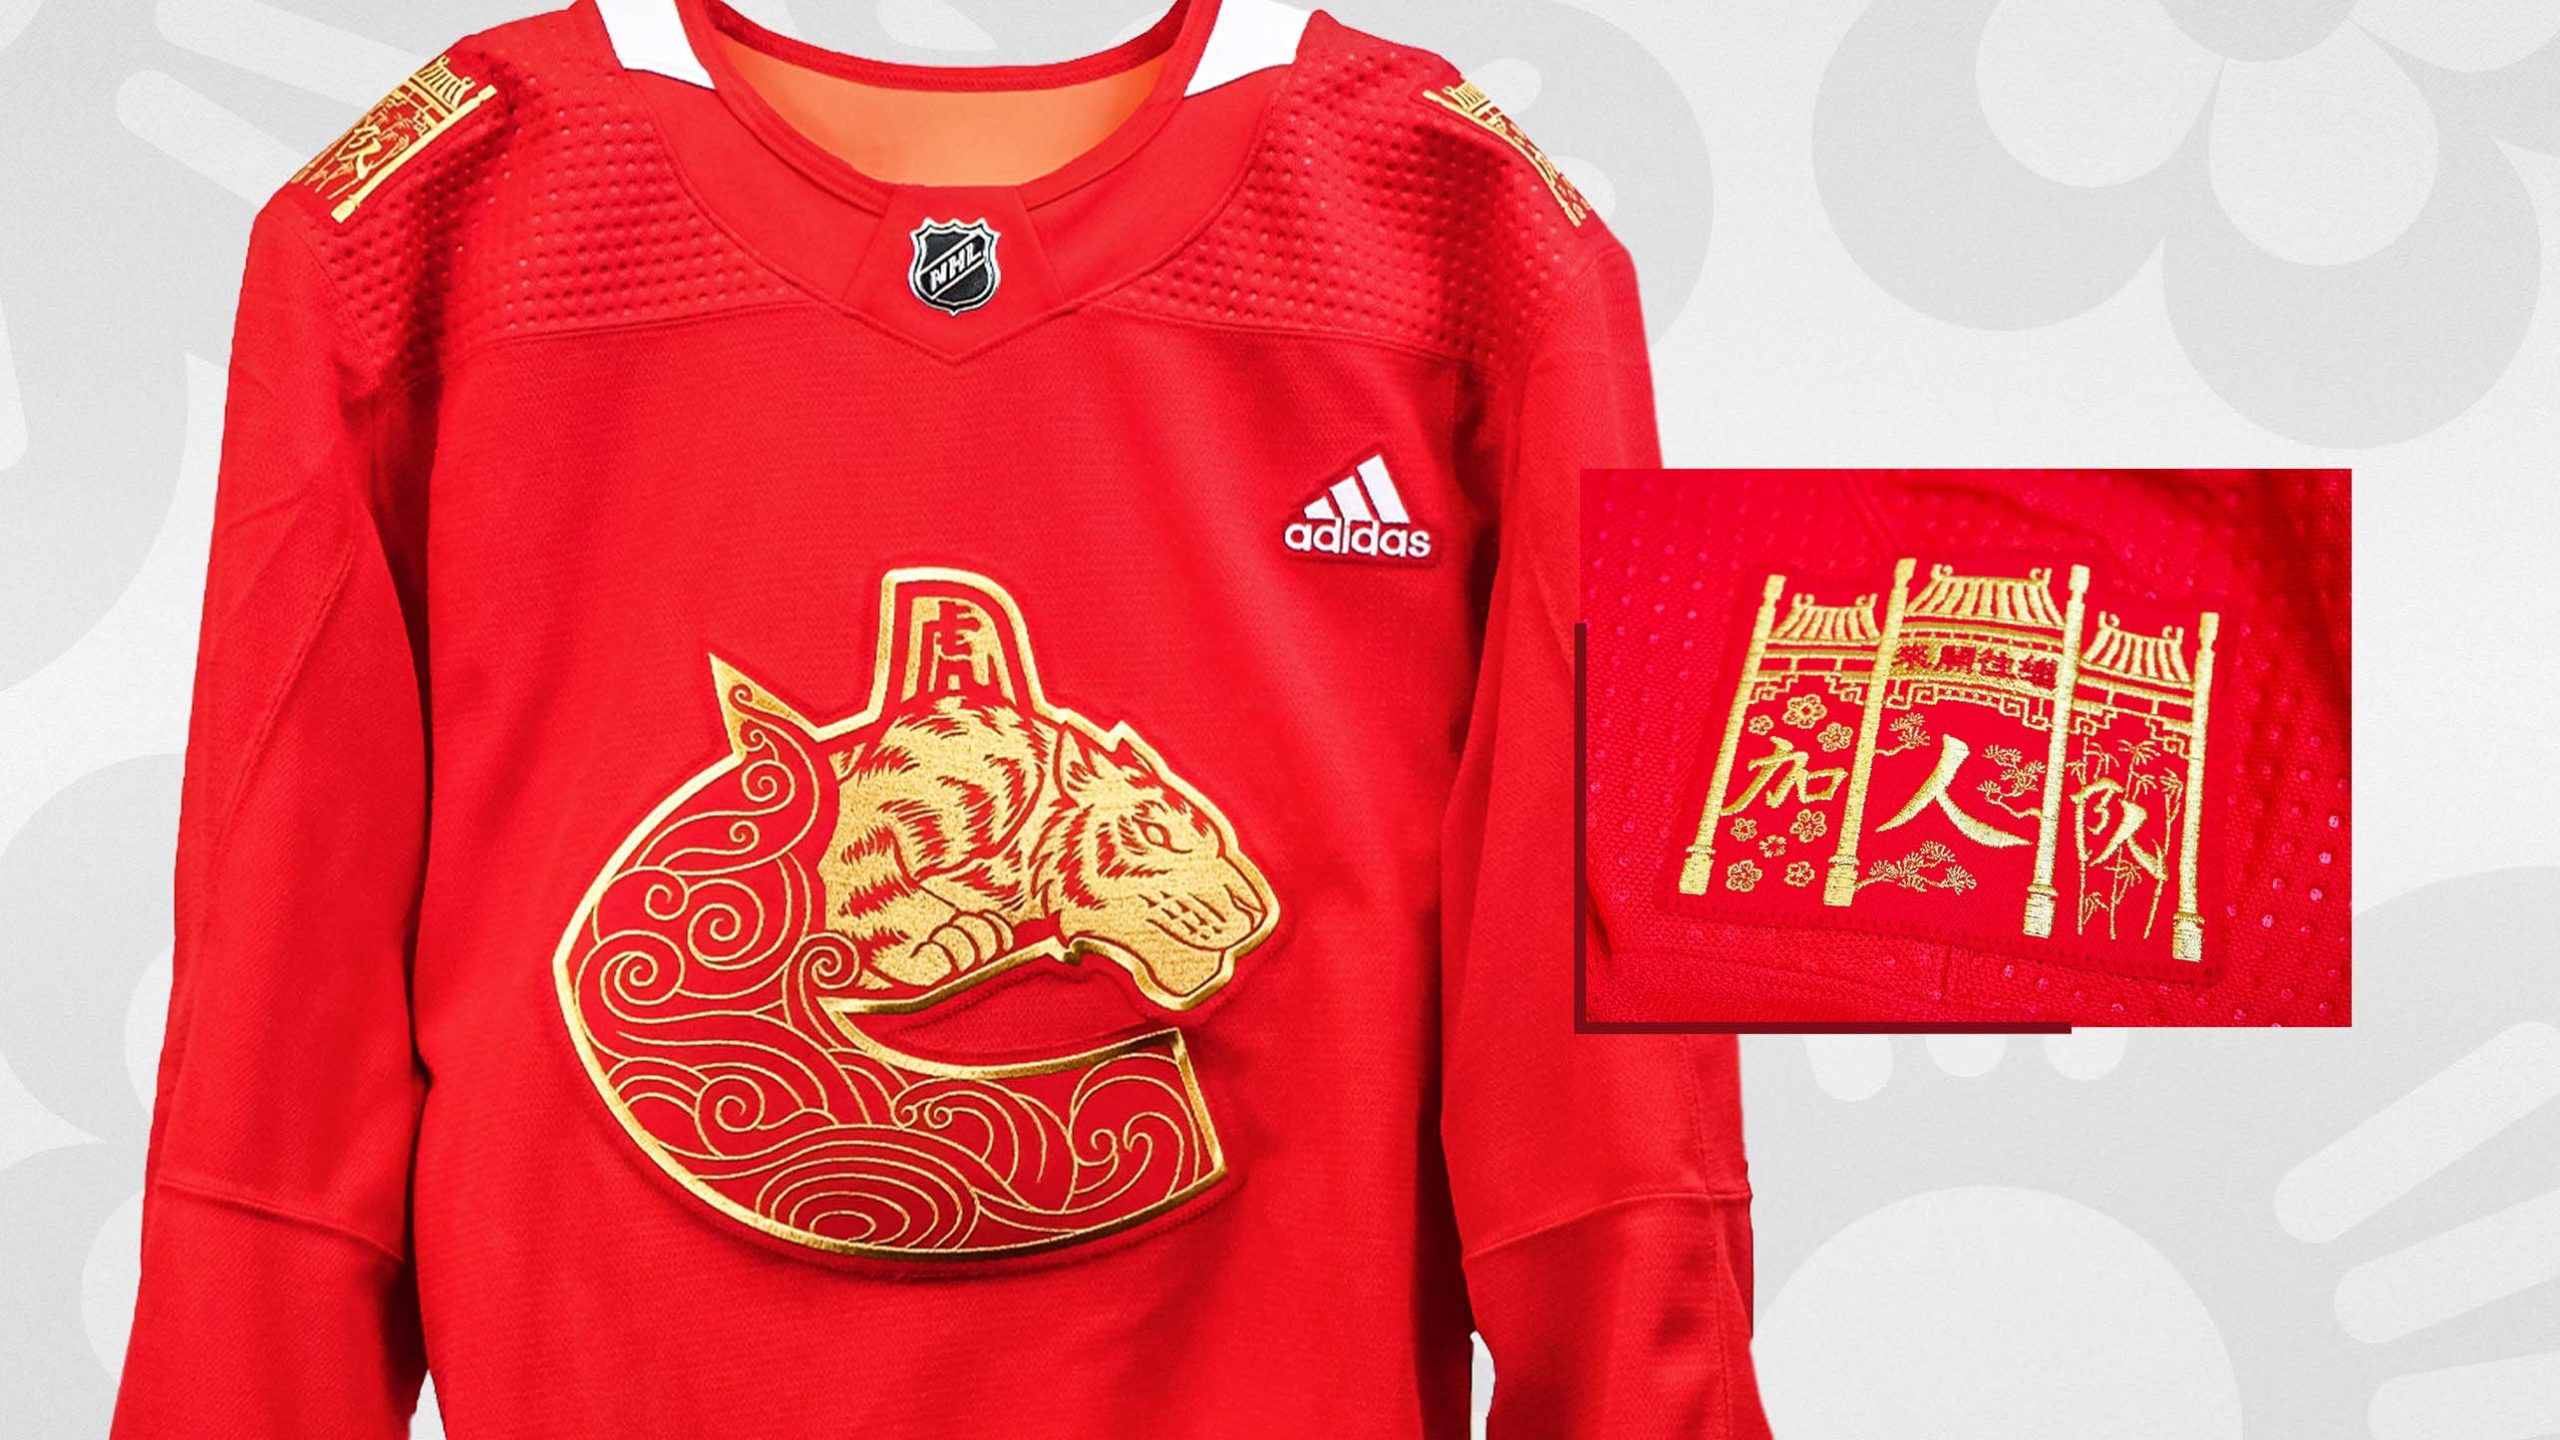 Canucks to play Chinese New Year game with special dragon jerseys -  Richmond News